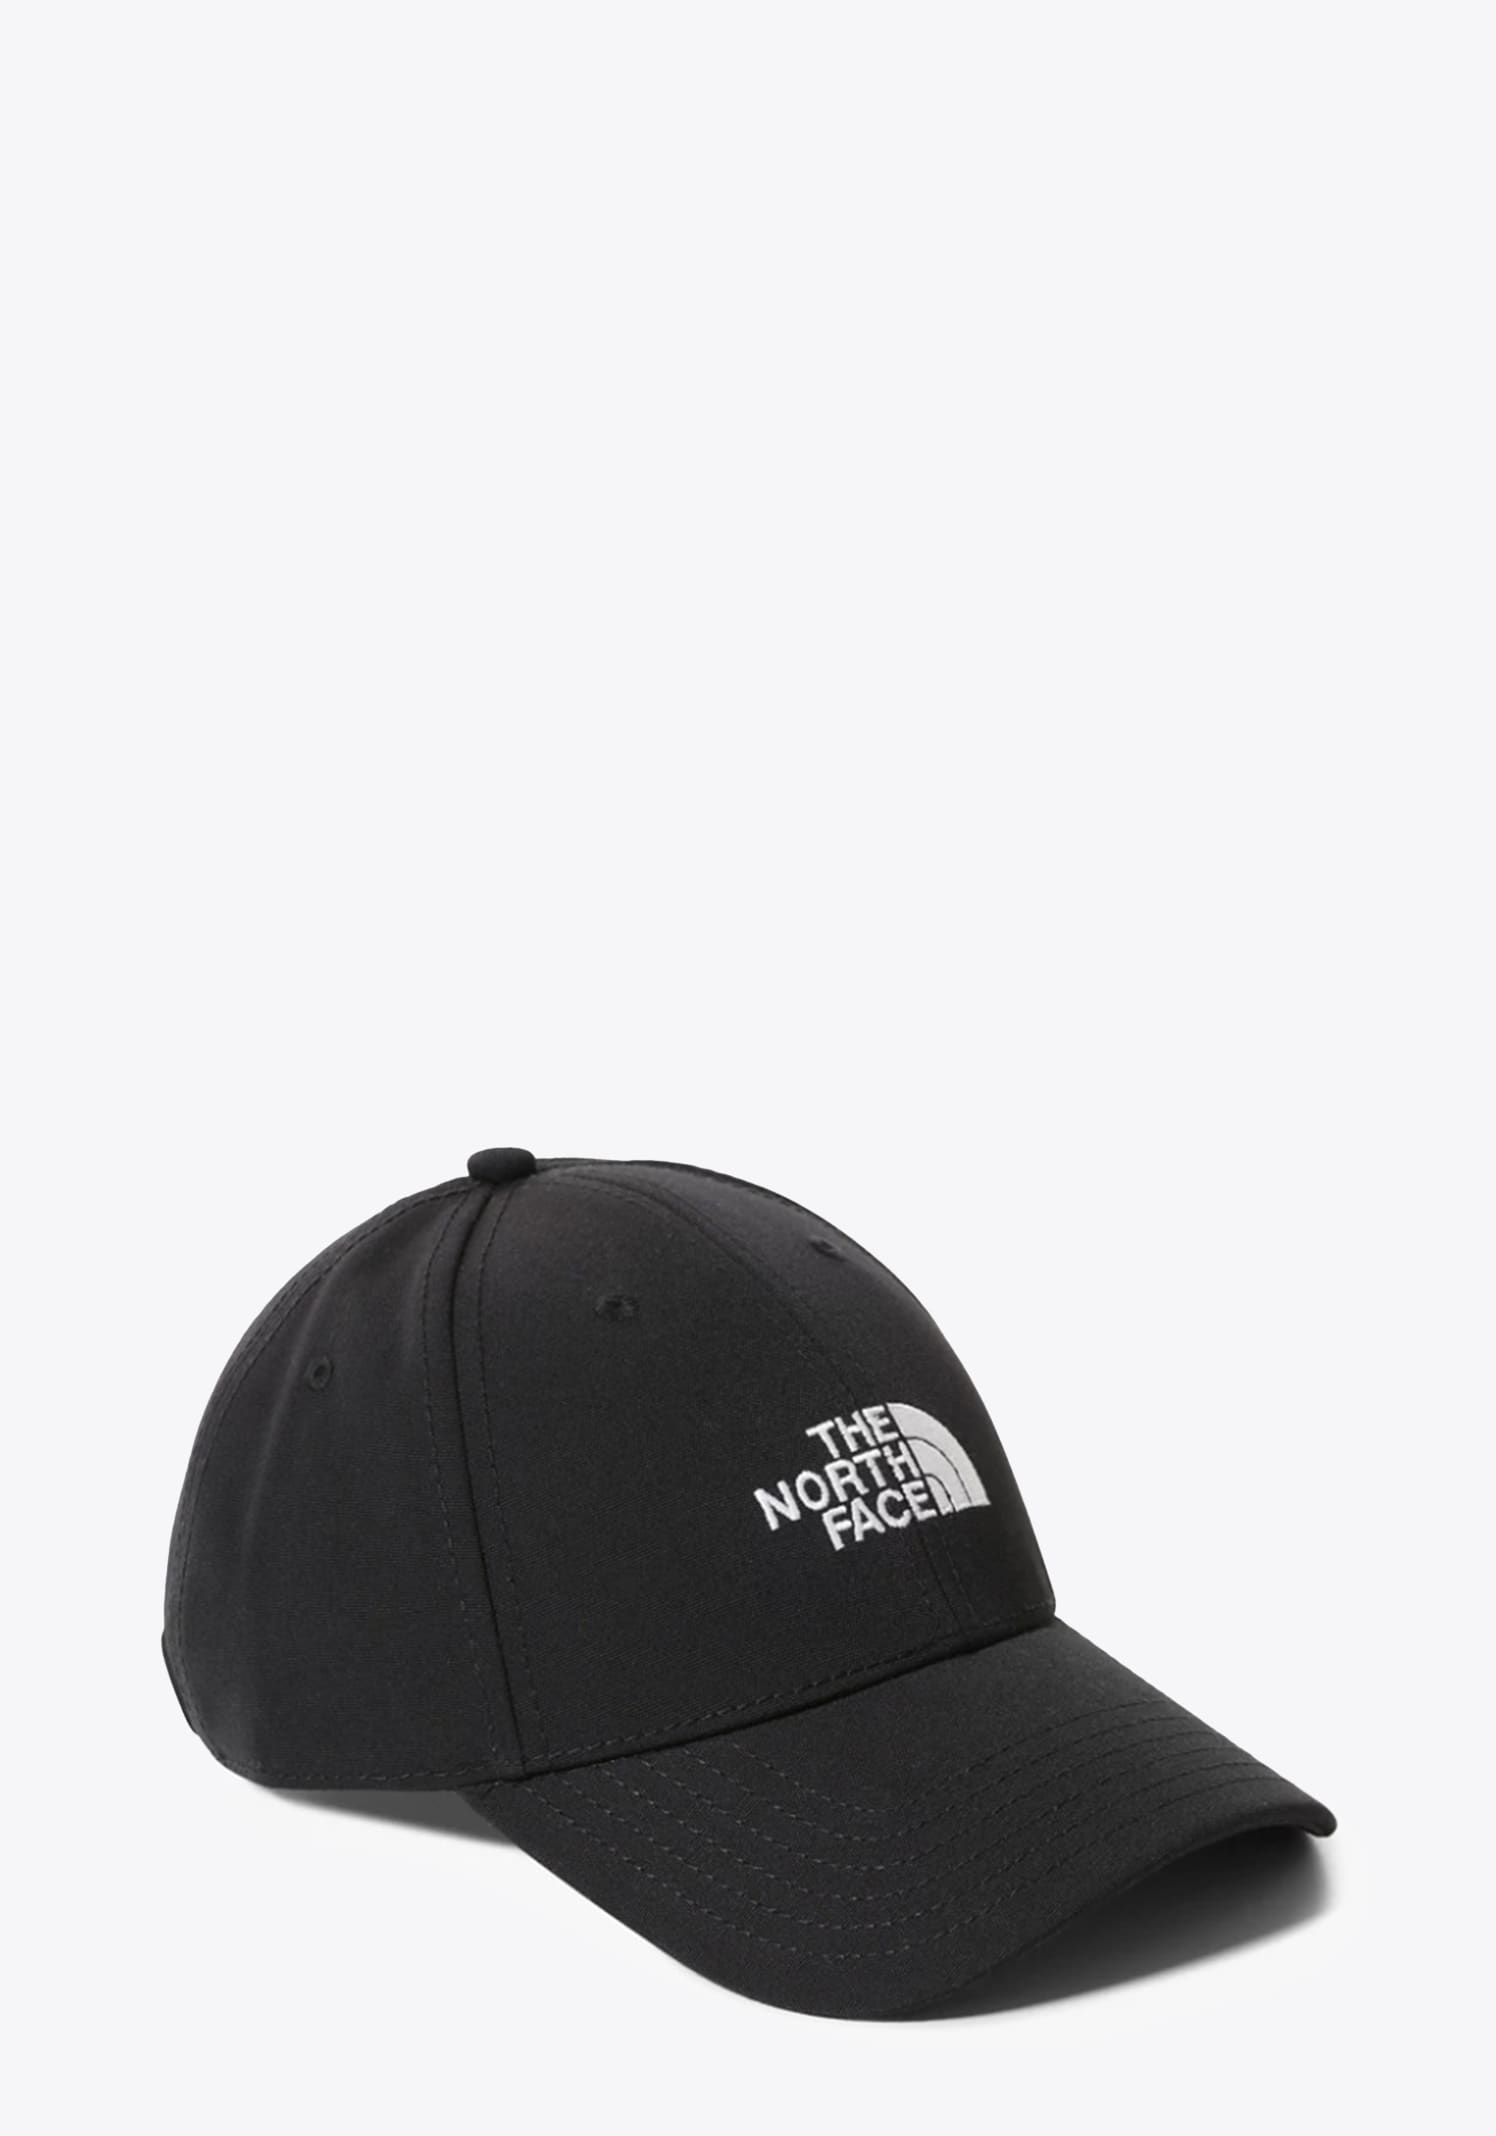 THE NORTH FACE RECYCLED 66 CLASSIC HAT BLACK CANVAS CAP WITH LOGO EMBROIDERY - RECYCLED 66 CLASSIC HAT